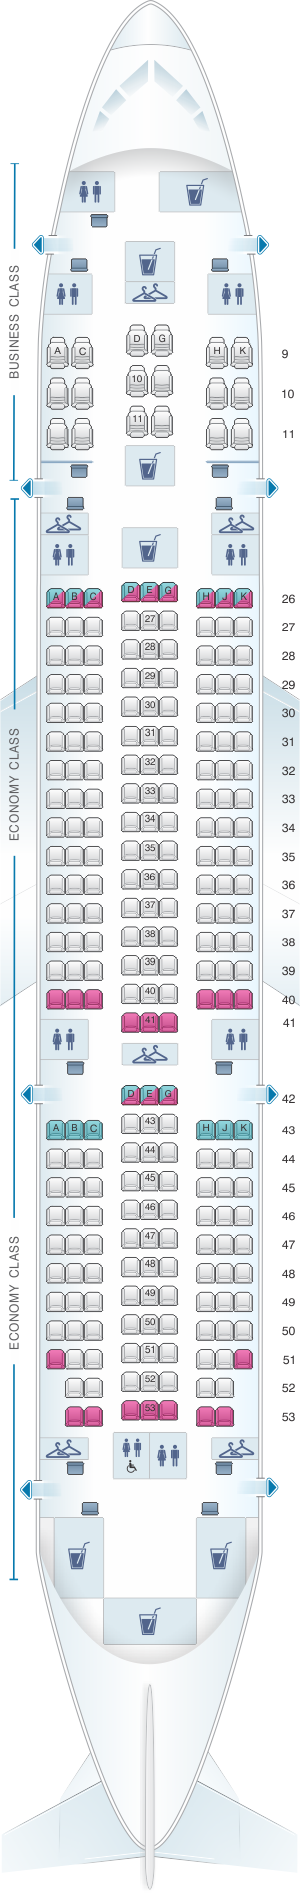 Seat map for Royal Brunei Airlines Boeing B787-8 Dreamliner